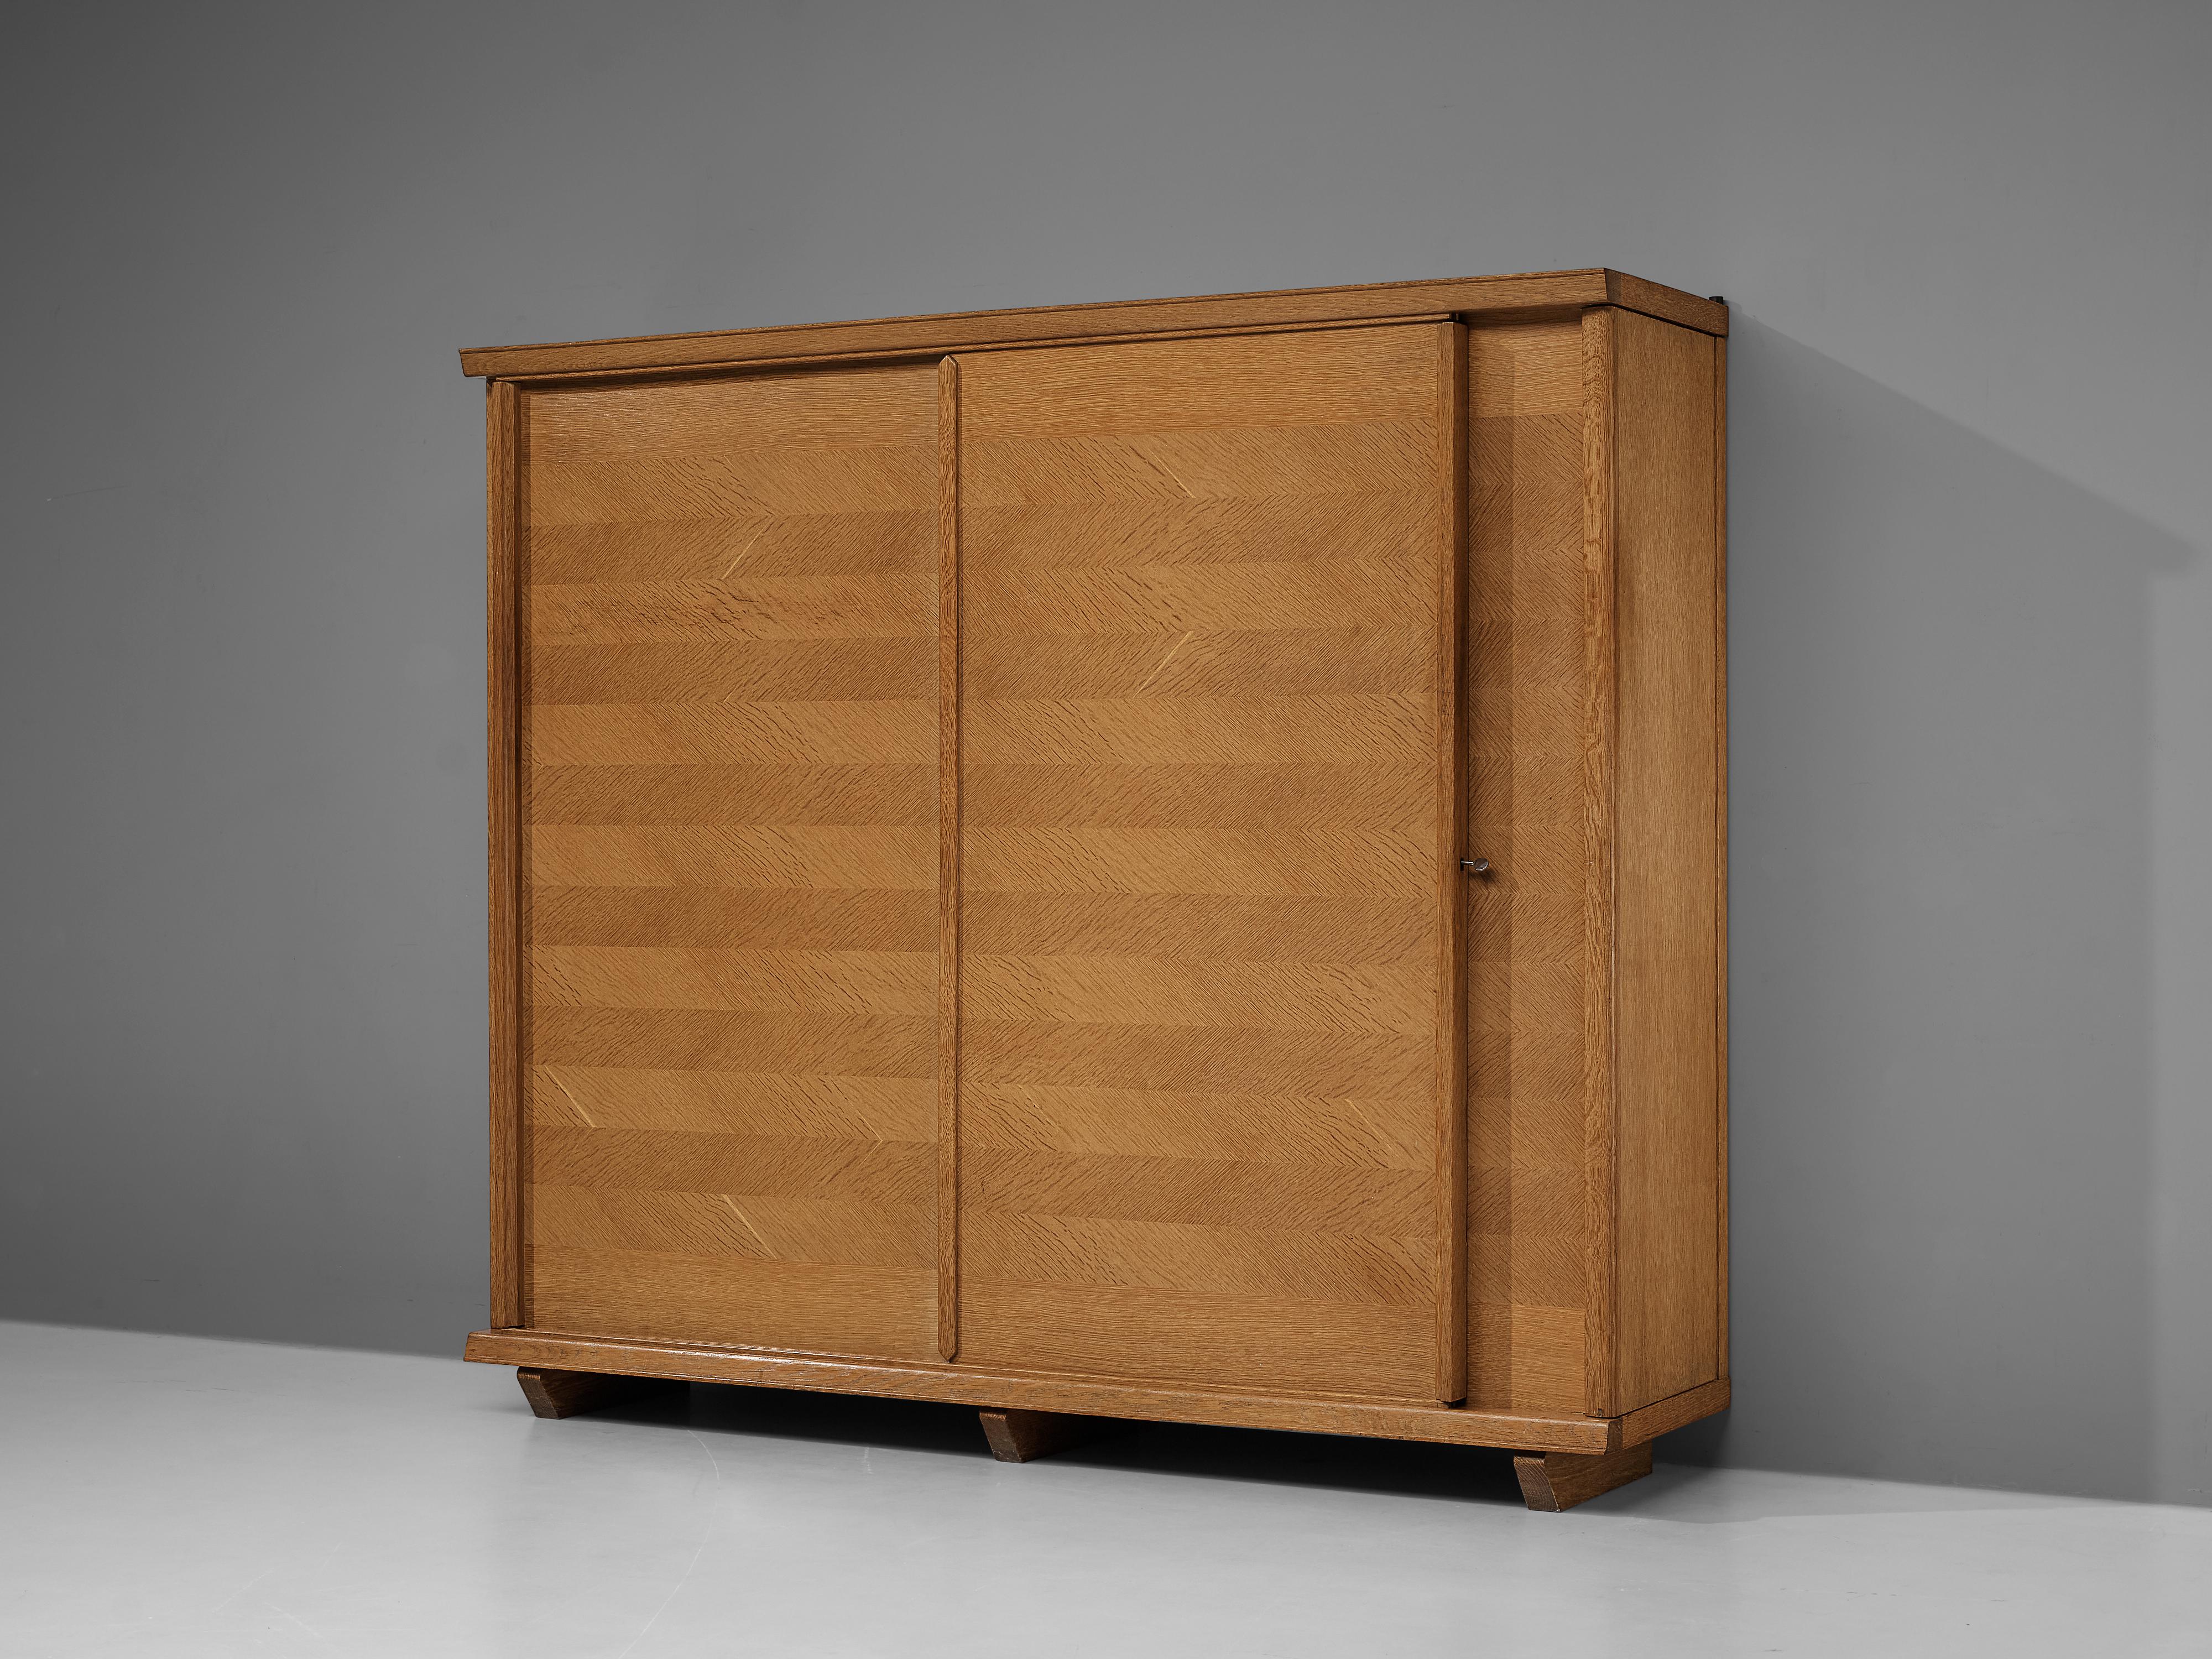 Guillerme & Chambron, wardrobe, oak, France, 1960s

This grand wardrobe is made in beautiful blonde oak wood in a flattering horizontal pattern in a darker and lighter wood. It was designed by duo Guillerme and Chambron in the 1960s. The two doors